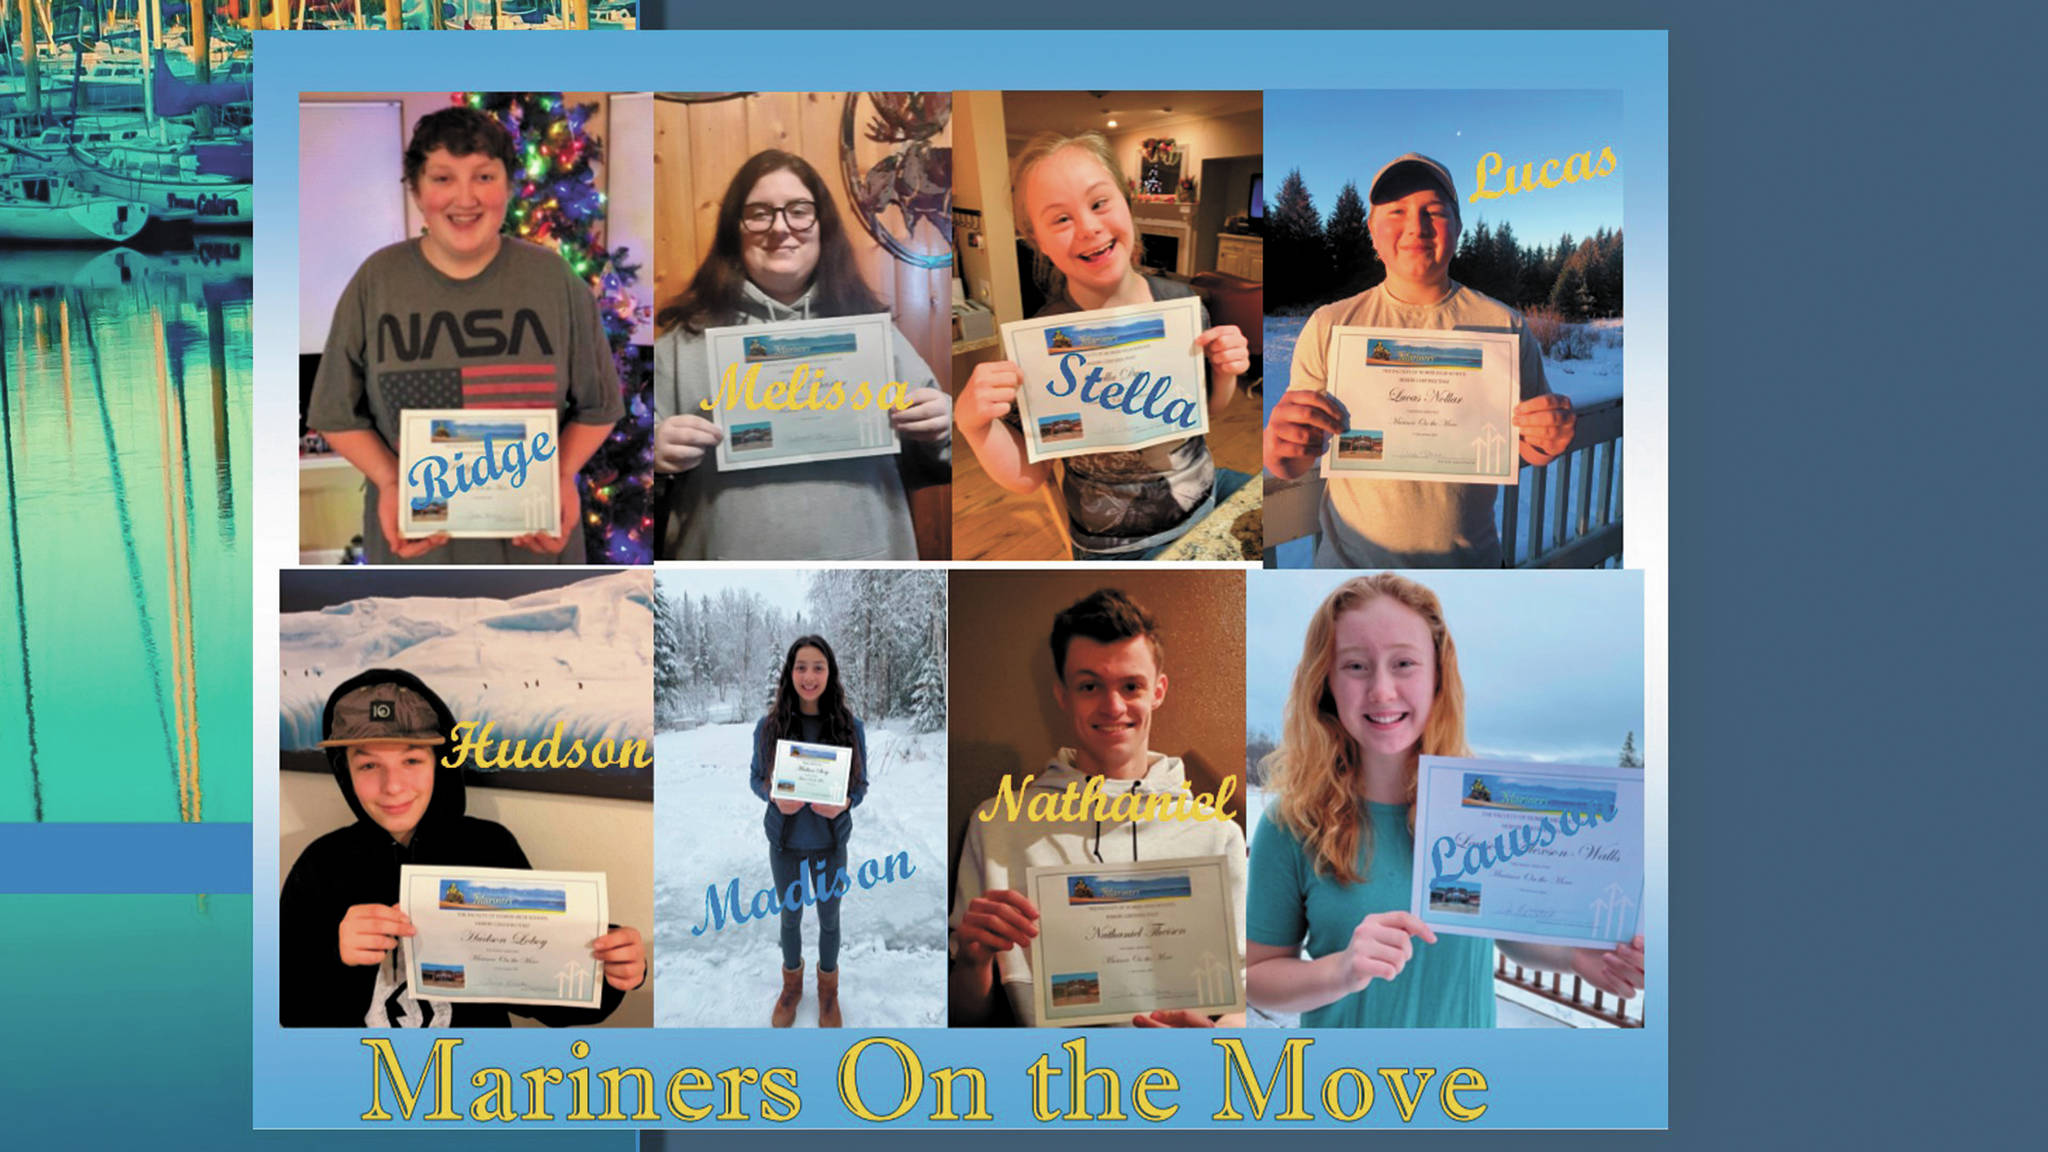 This compilation shows the recipients of this quarter’s Mariners on the Move awards. (Photo courtesy Paul Story)